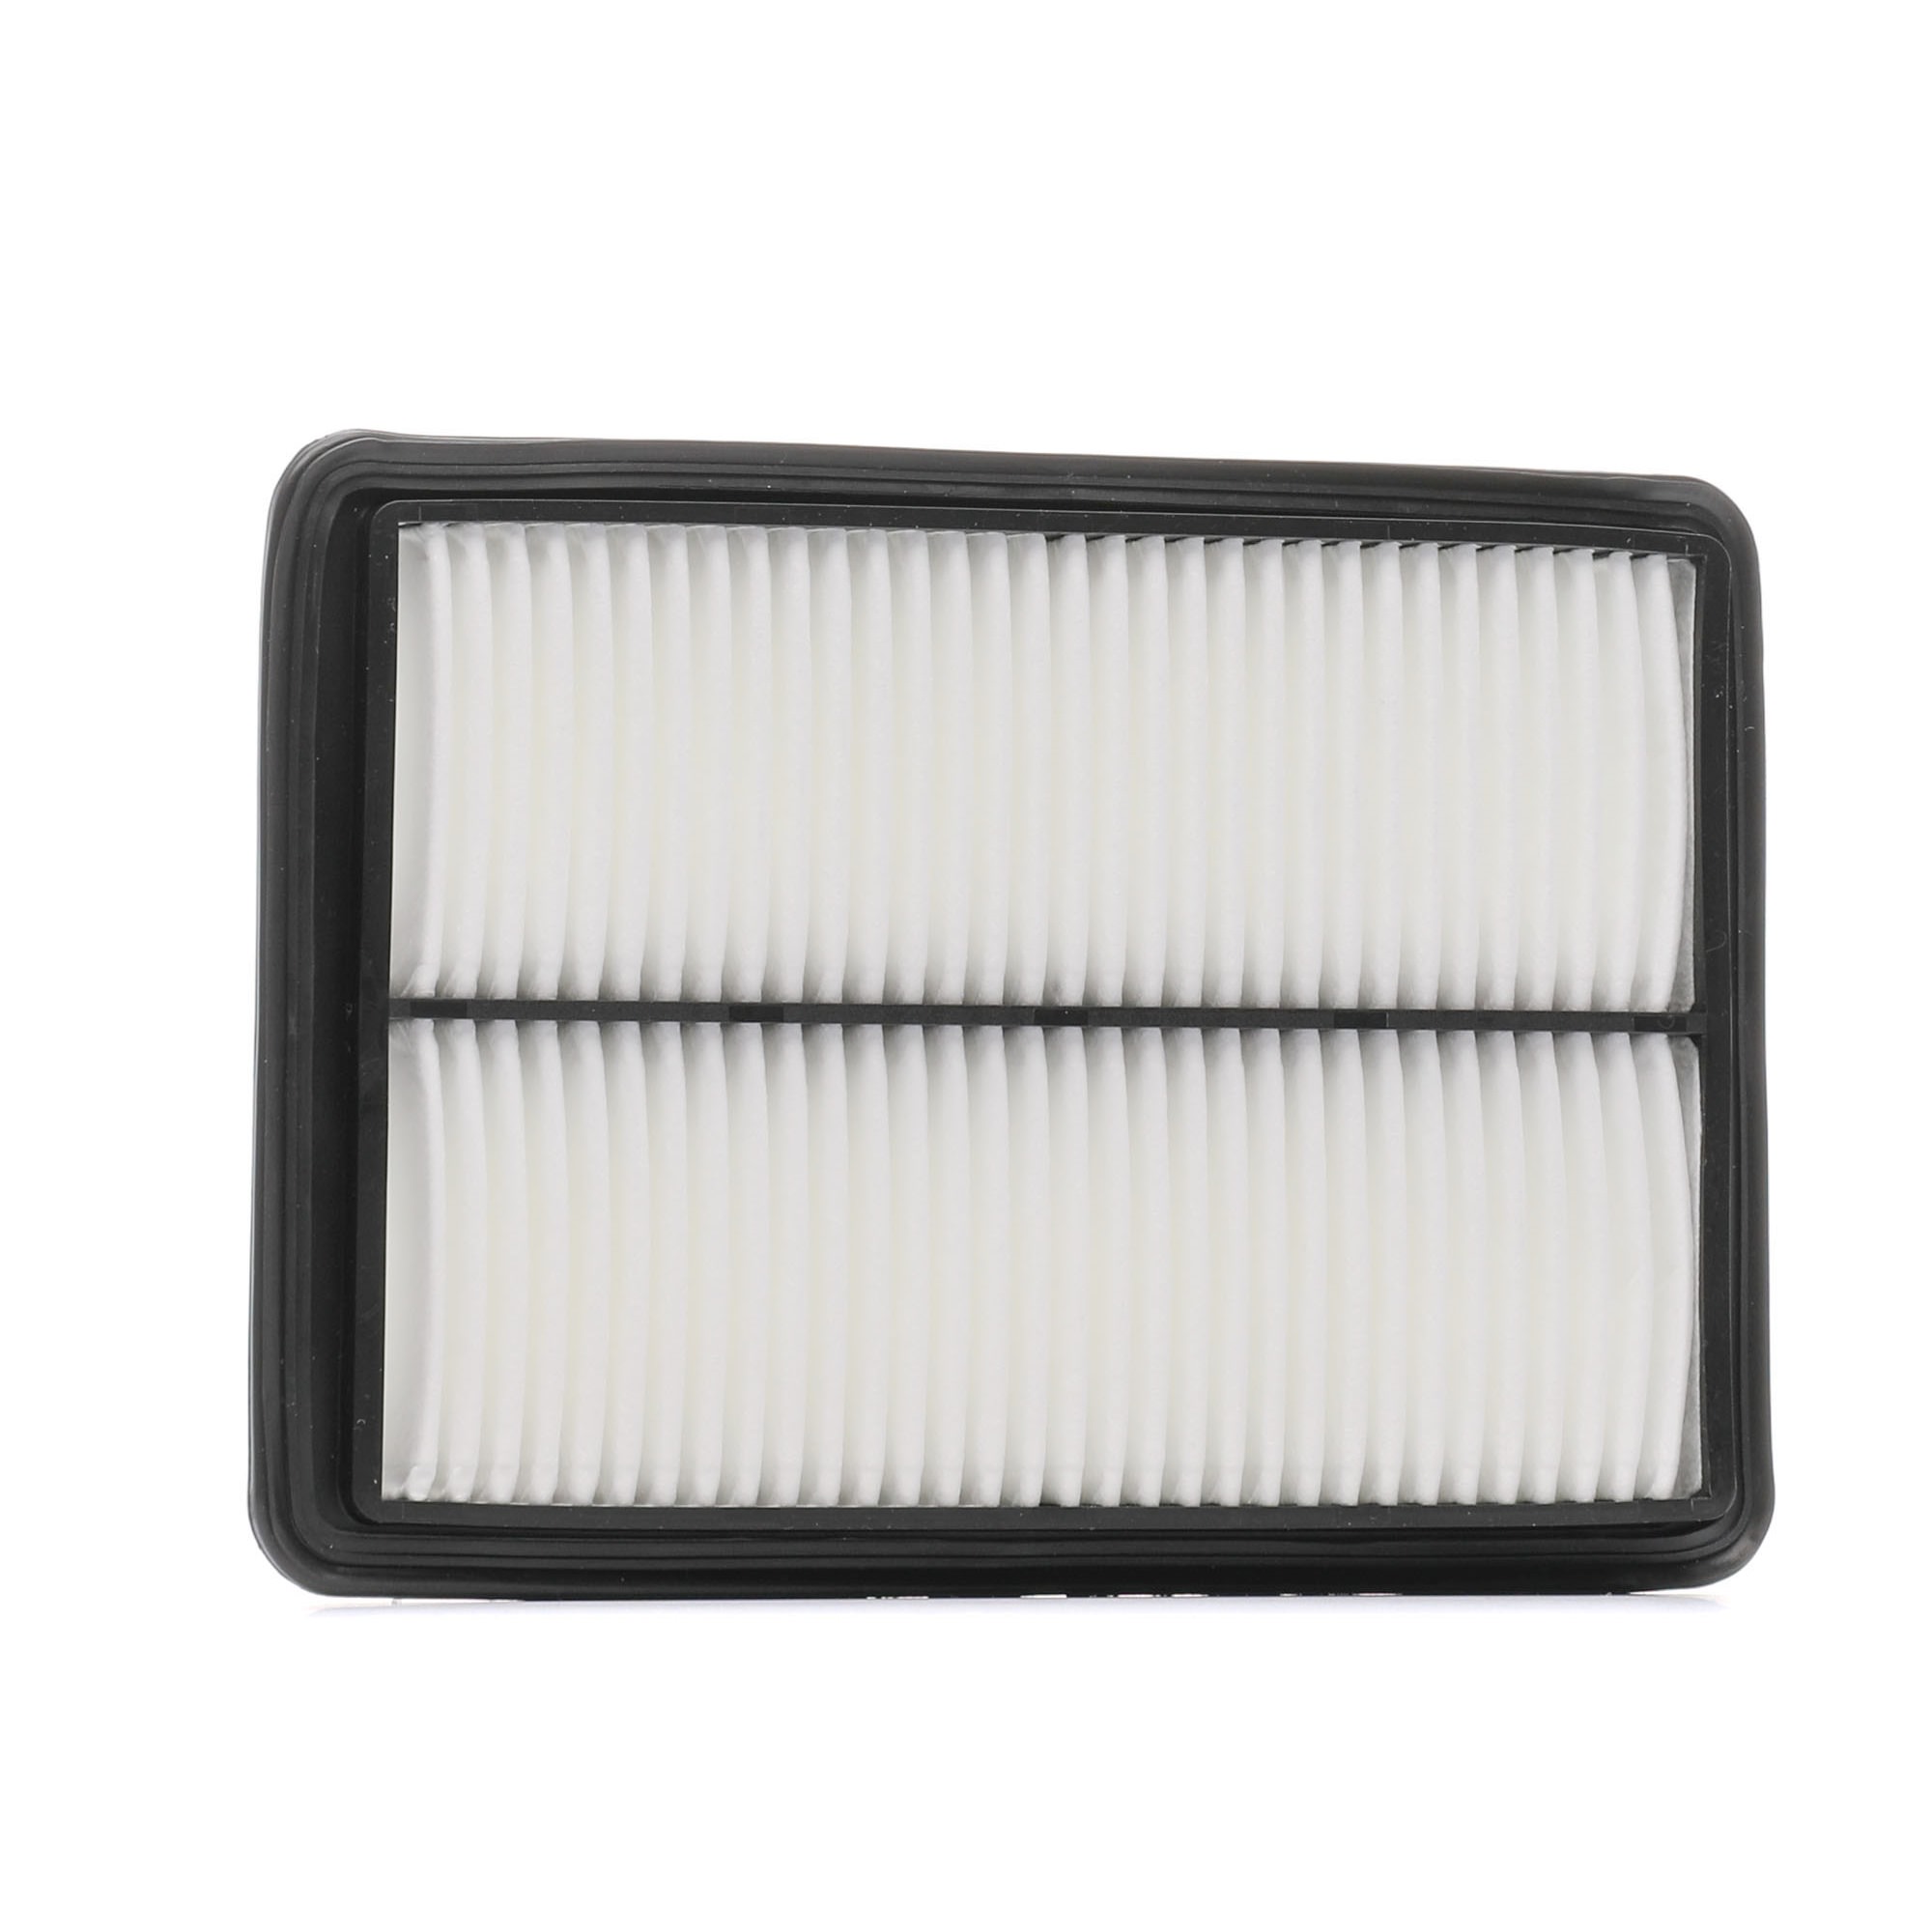 8A0461P RIDEX PLUS Air filters RENAULT 28mm, 170mm, 250mm, Filter Insert